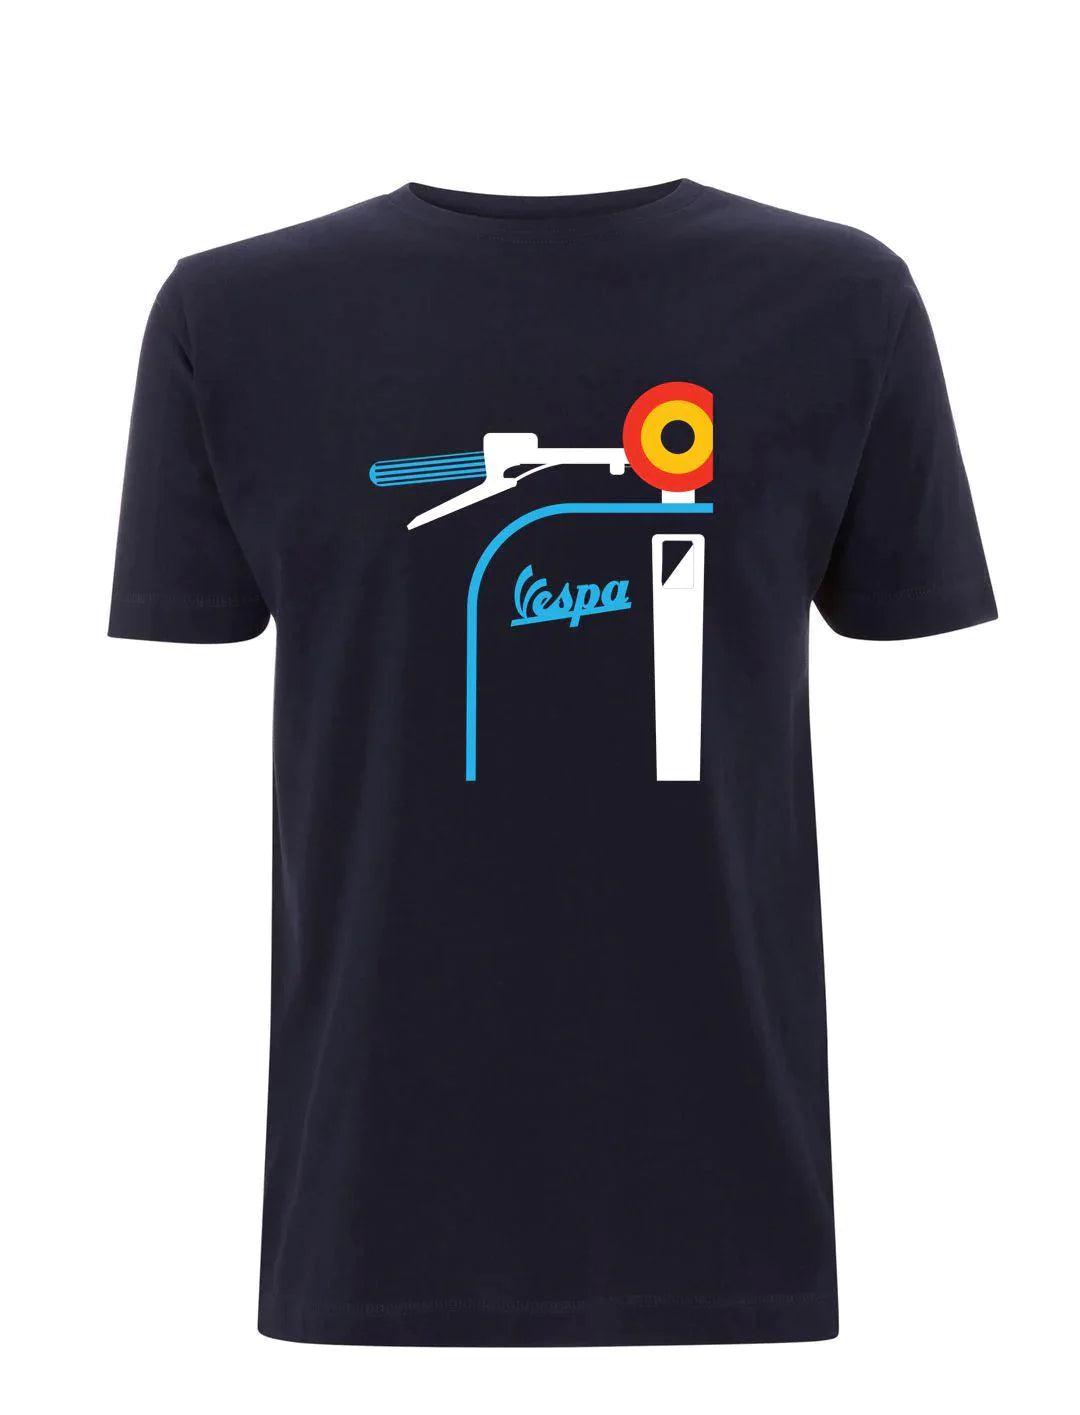 VESPA: T-Shirt Inspired by Classic Italian Scooters - SOUND IS COLOUR